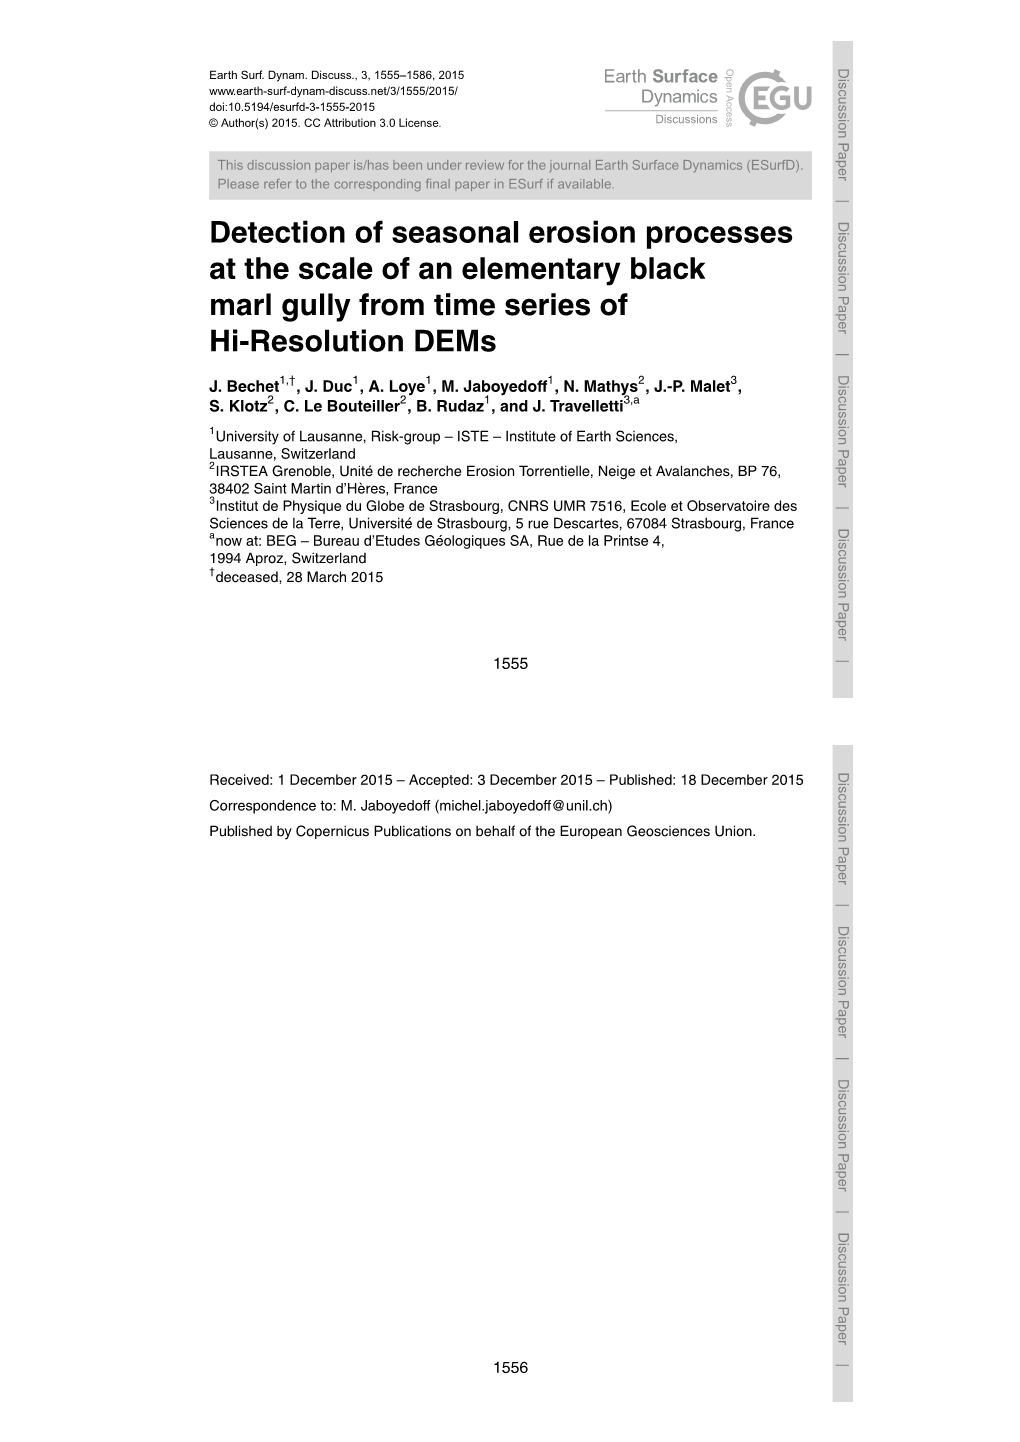 Detection of Seasonal Erosion Processes at the Scale of Anmarl Elementary Gully Black from Time Serieshi-Resolution of Dems J